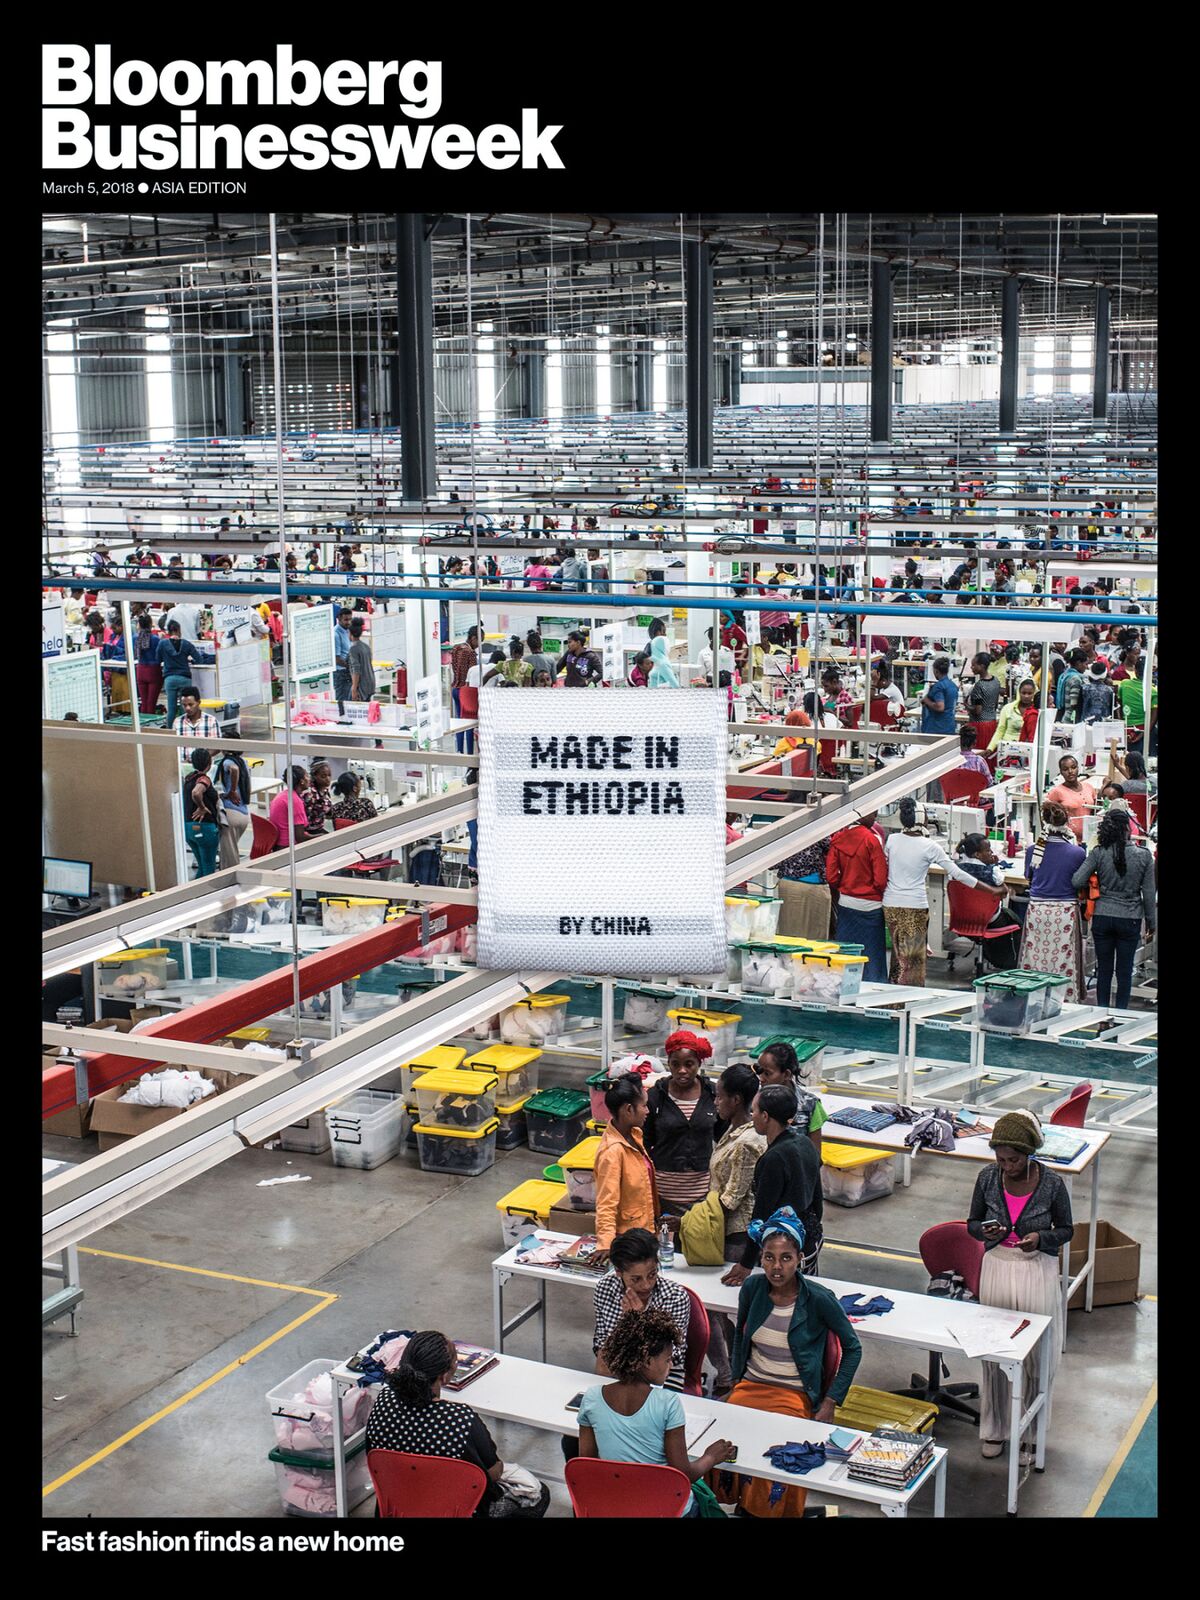 China Is Turning Ethiopia Into a Giant Fast-Fashion Factory - Bloomberg